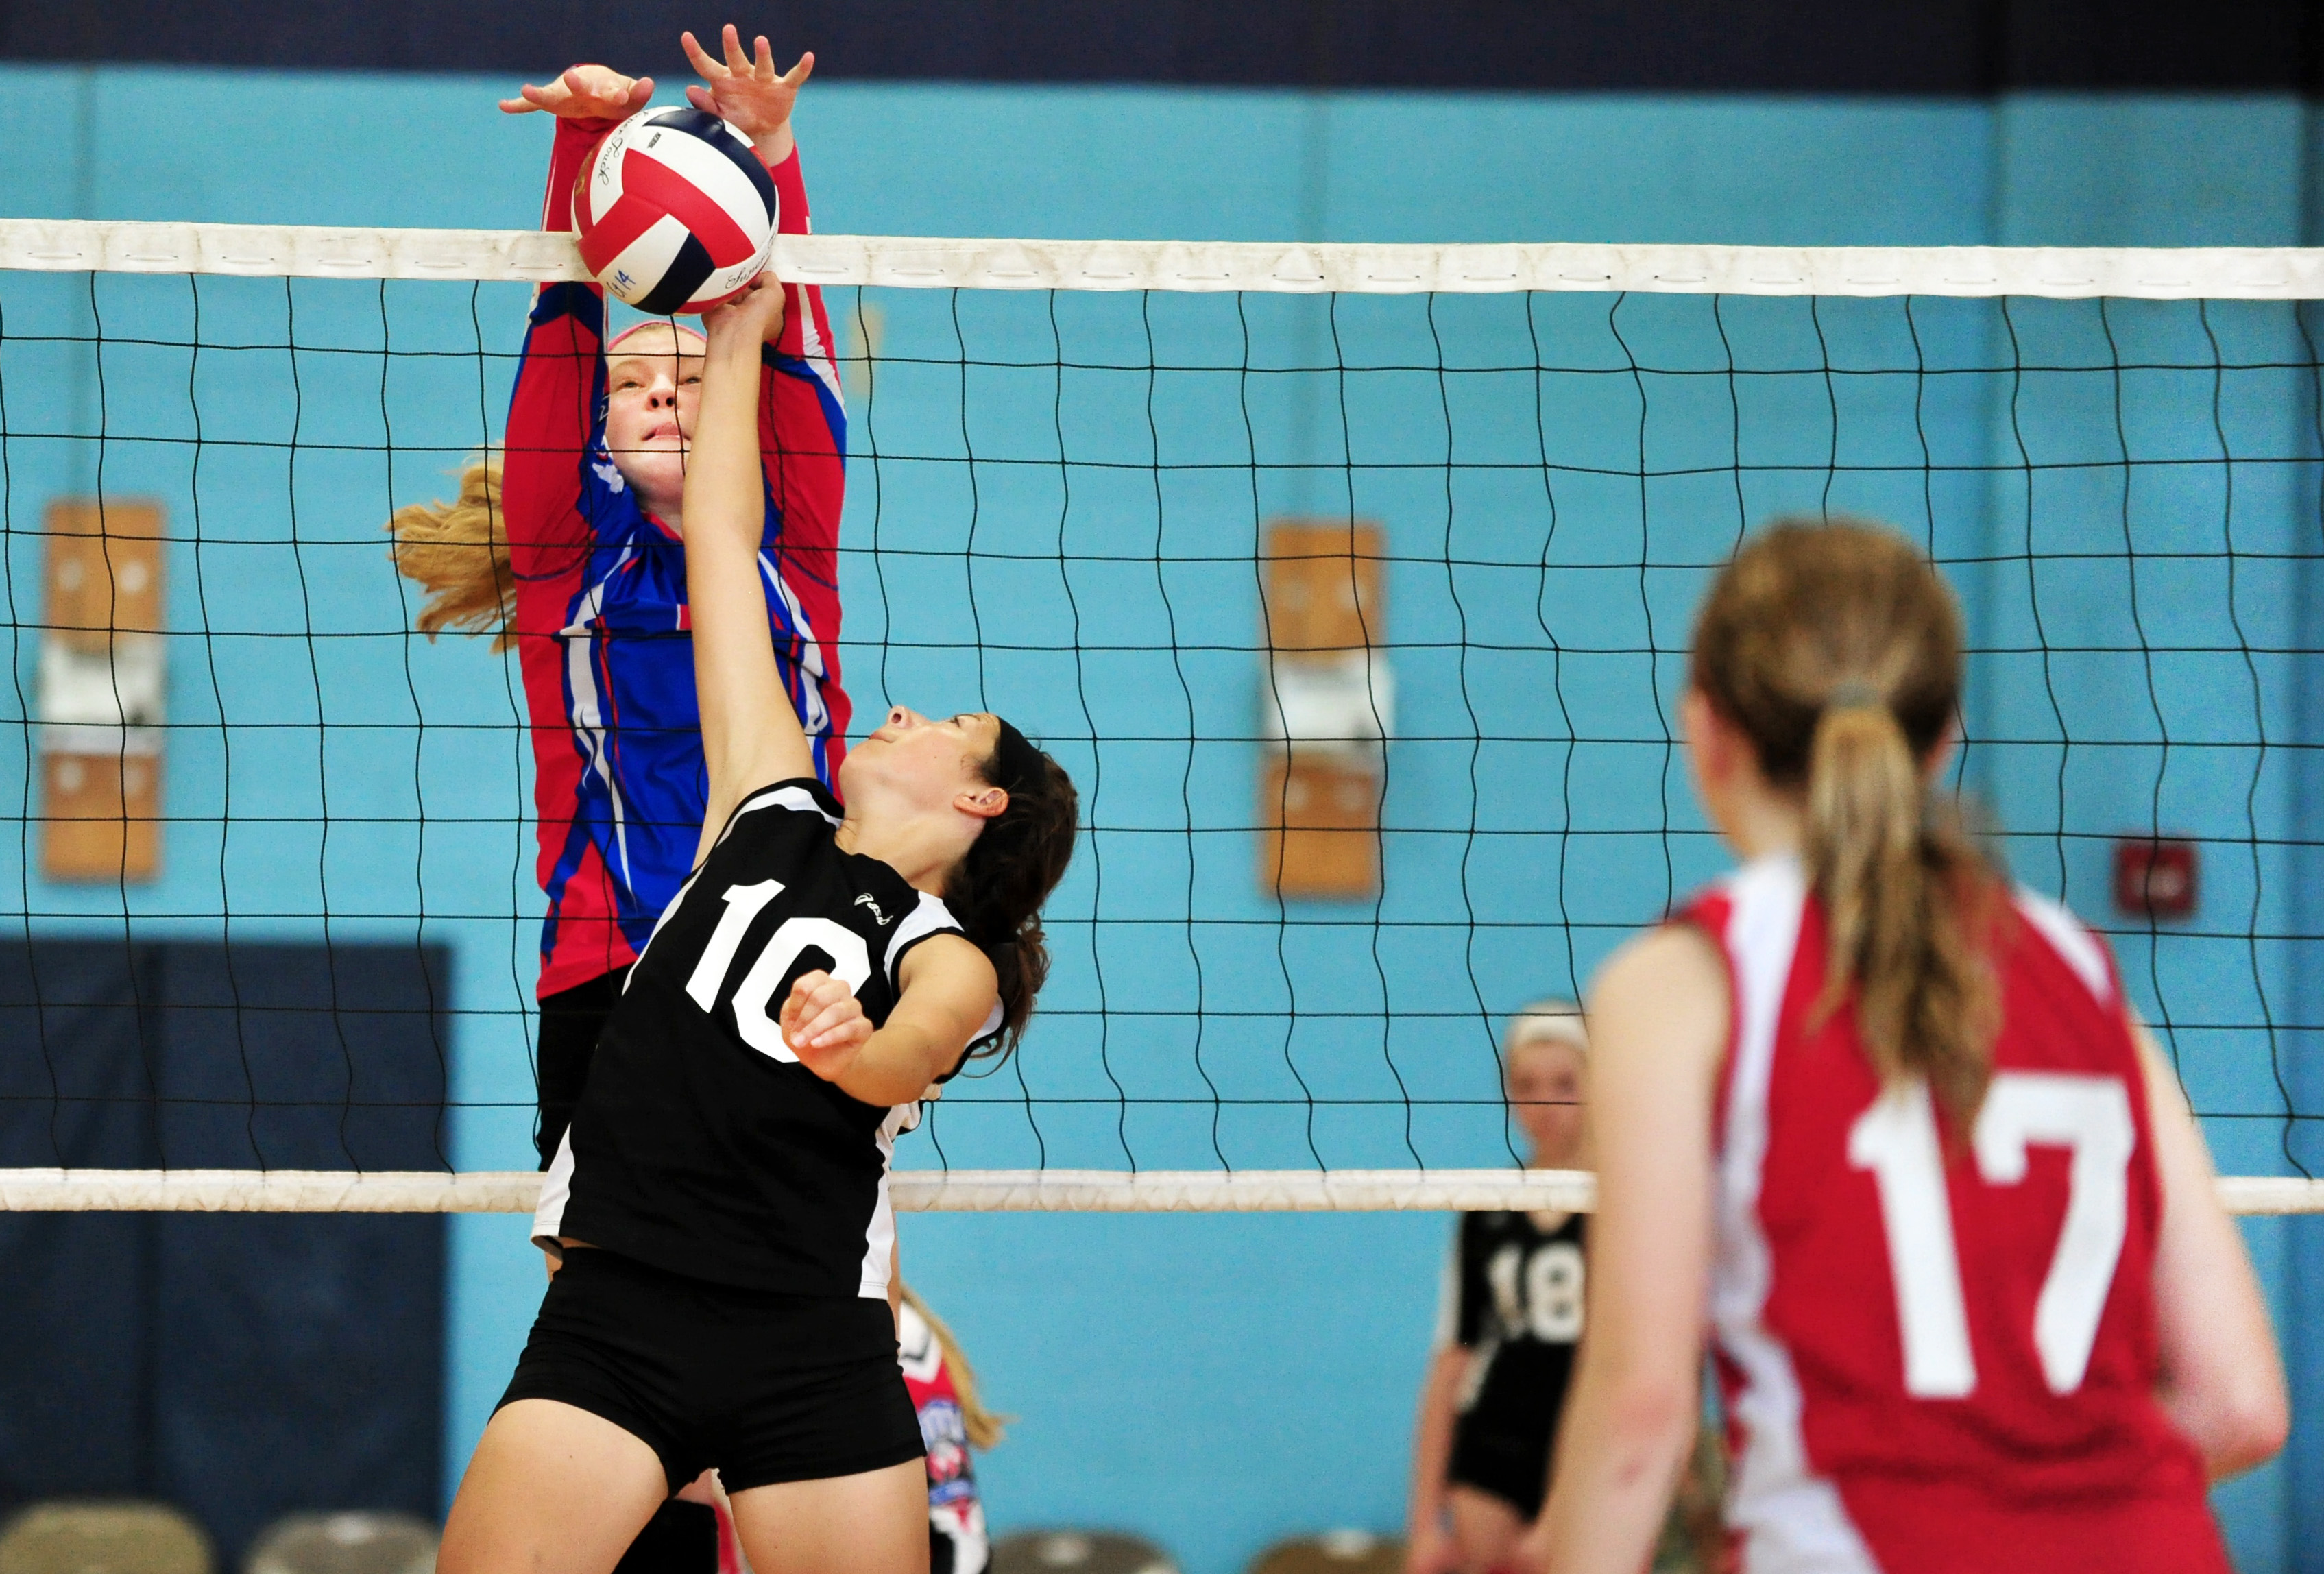 Volleyball players from opposing teams make contact with the ball at the net.